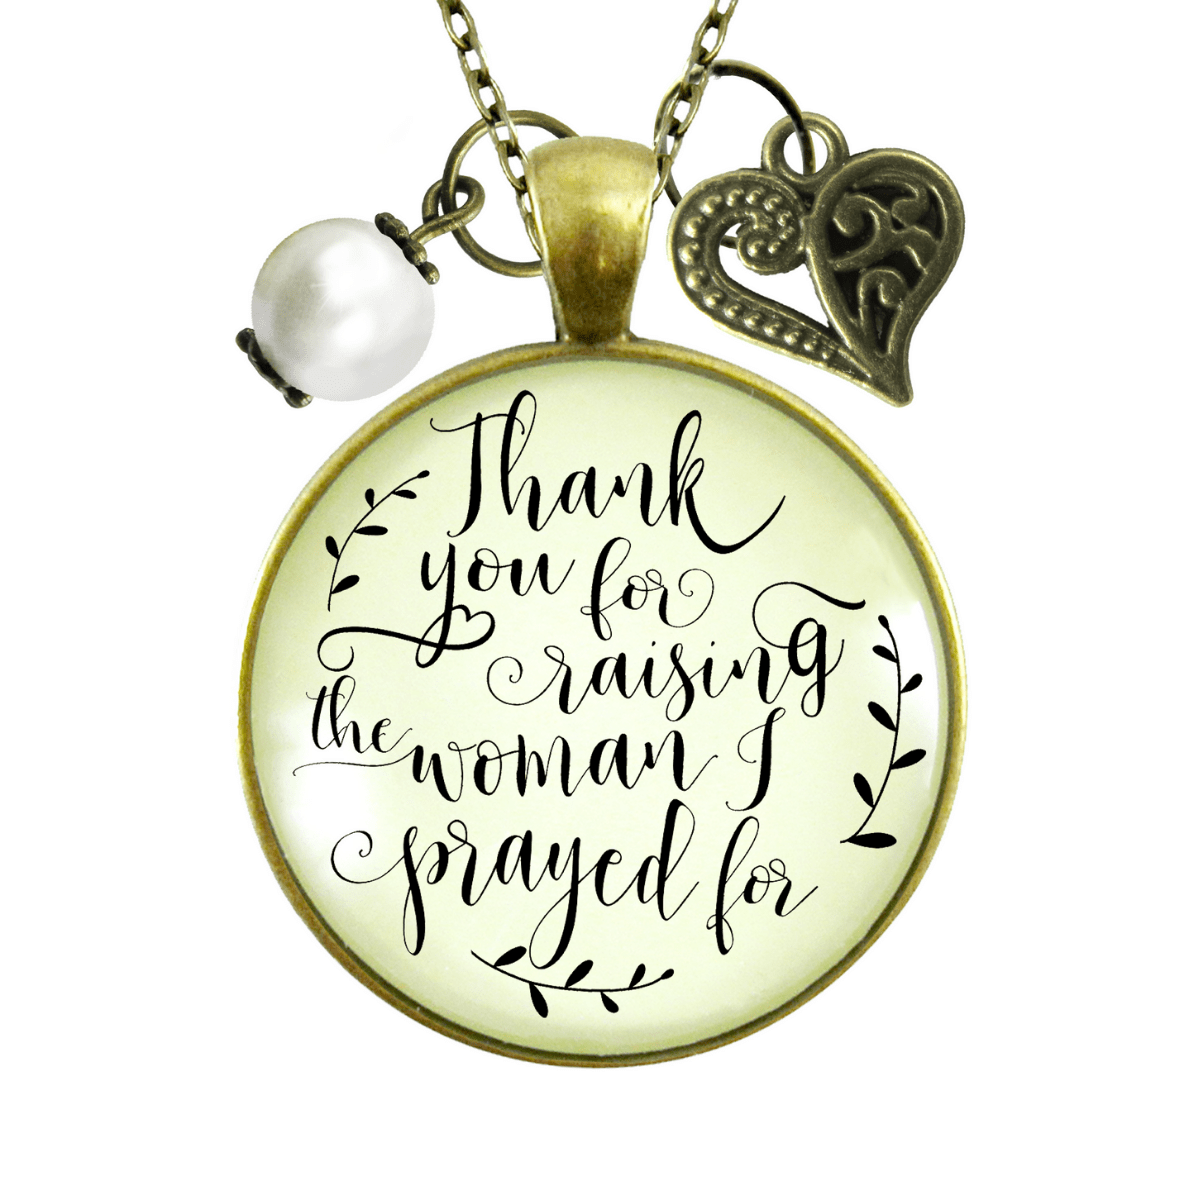 Gutsy Goodness Mother of Bride Necklace Thank You Raising Woman Prayed Wedding Gift - Gutsy Goodness Handmade Jewelry;Mother Of Bride Necklace Thank You Raising Woman Prayed Wedding Gift - Gutsy Goodness Handmade Jewelry Gifts